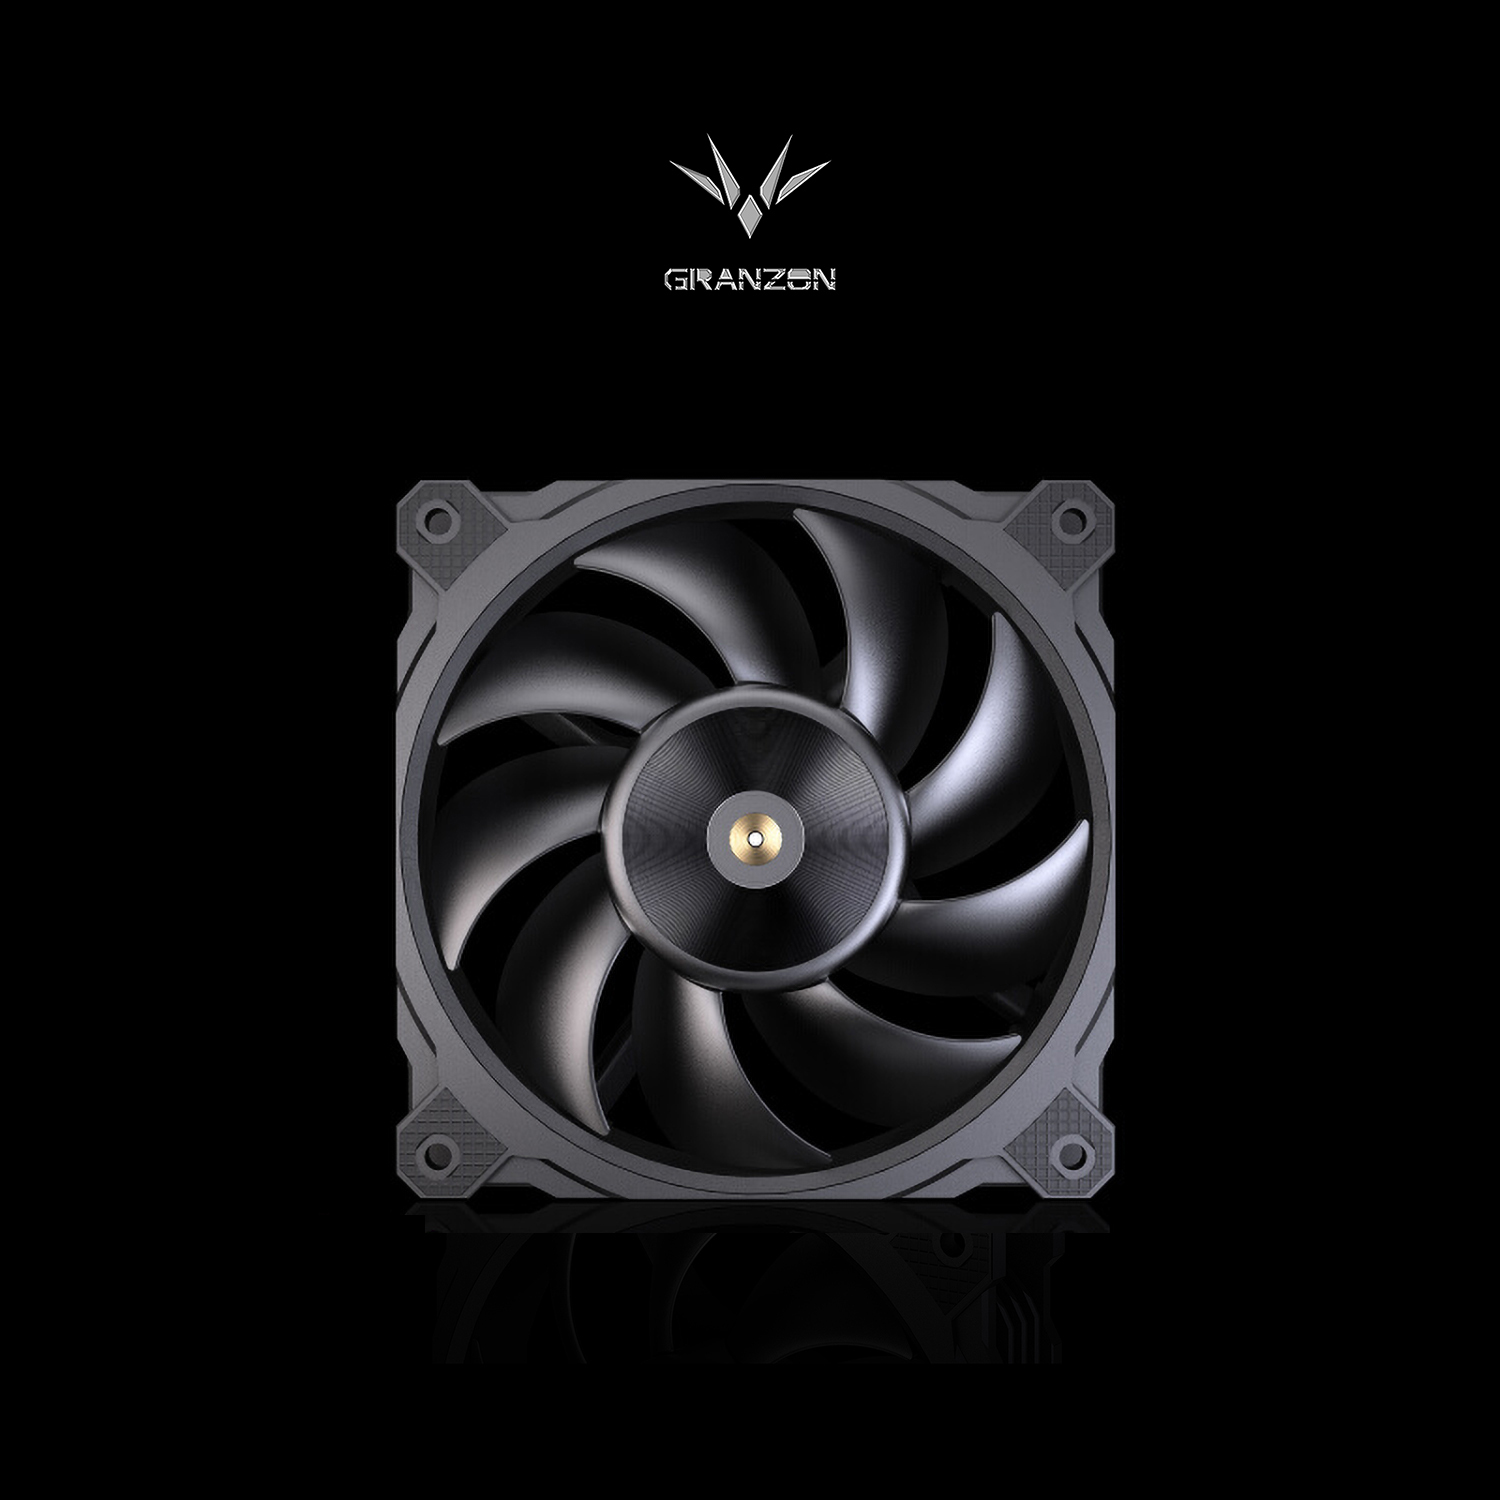 Granzon High Air Volume PWM Cooling Fan, 3000 RPM Double Ball Water Cooling Supercharged 120mm Cooler, at formulamod sale